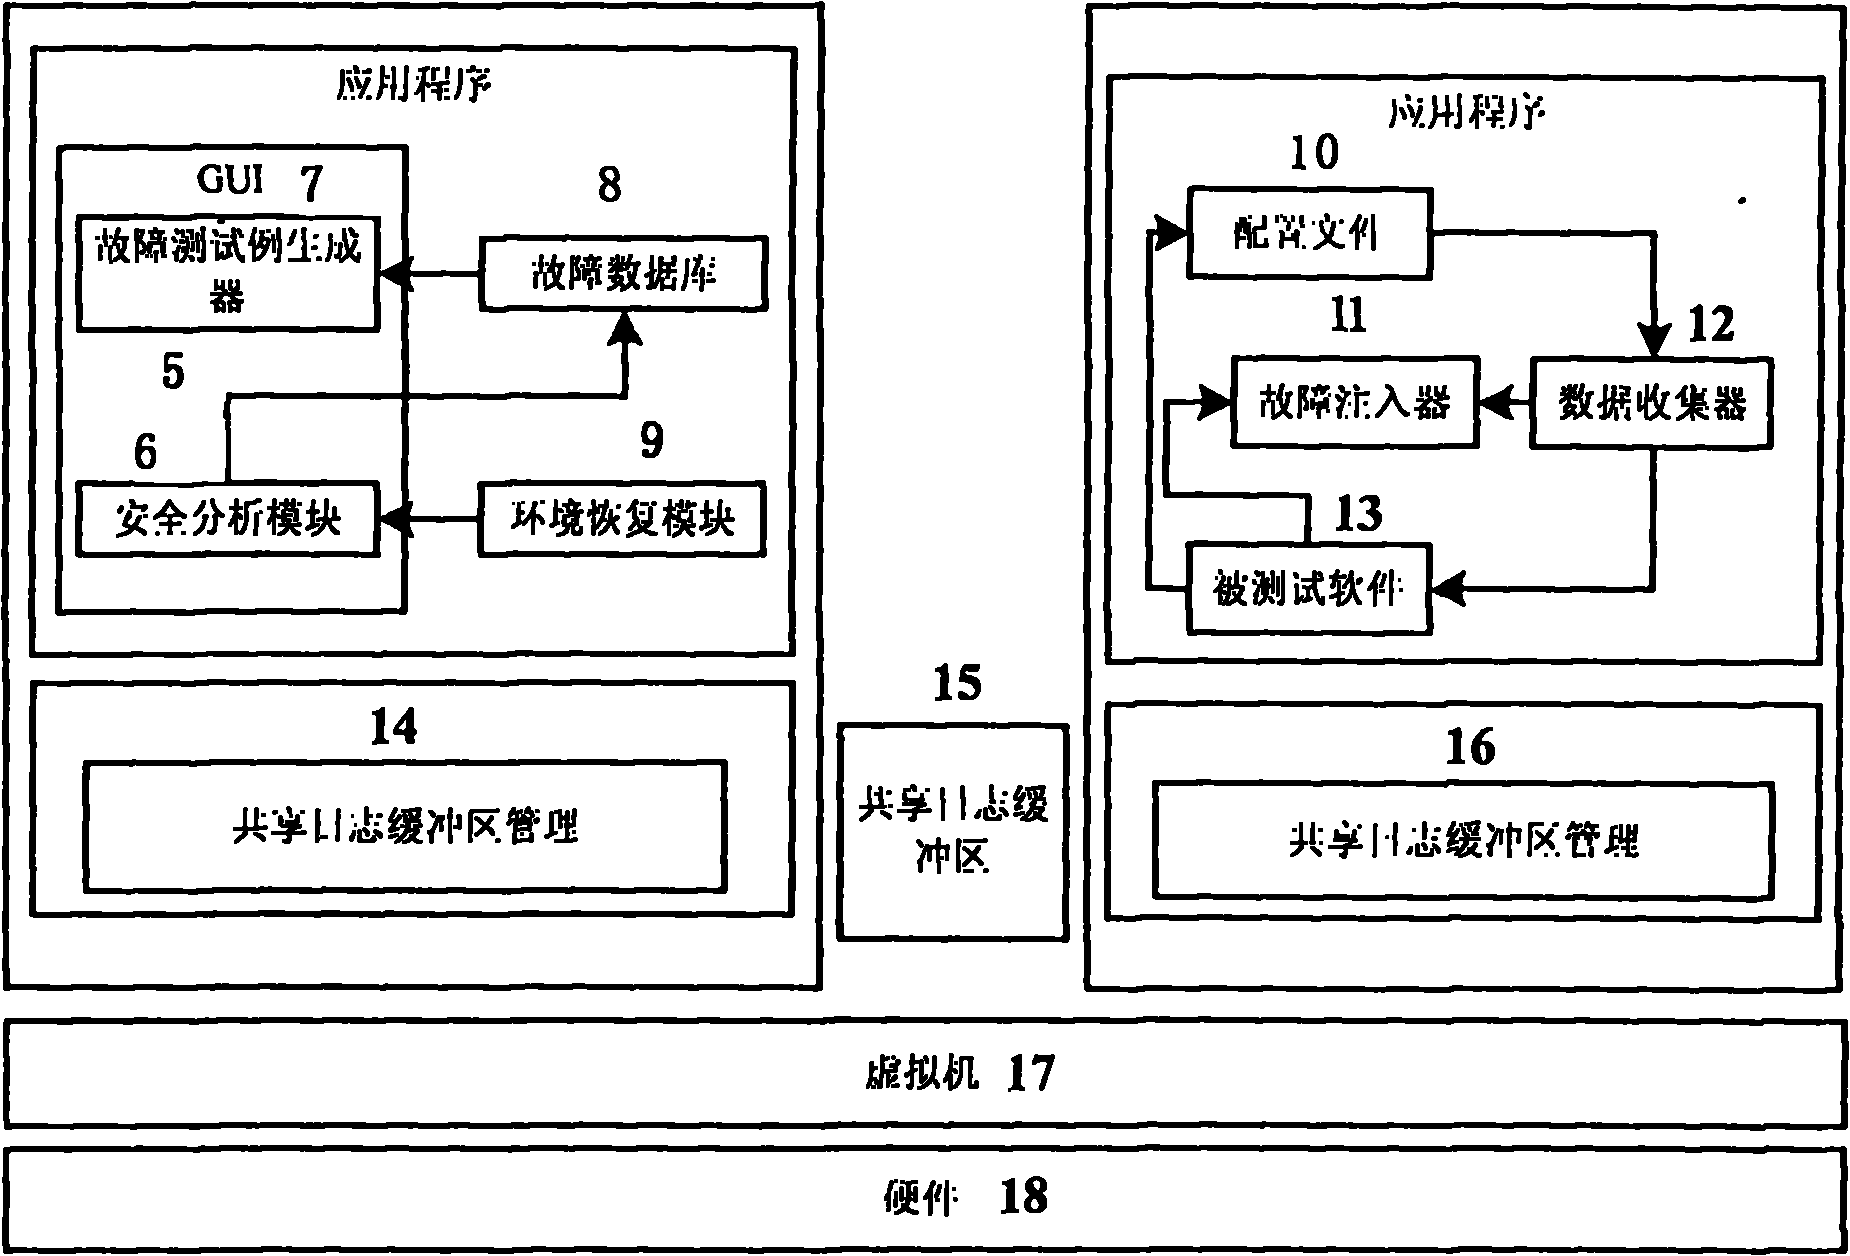 Method for fault-injection test based on virtual machine